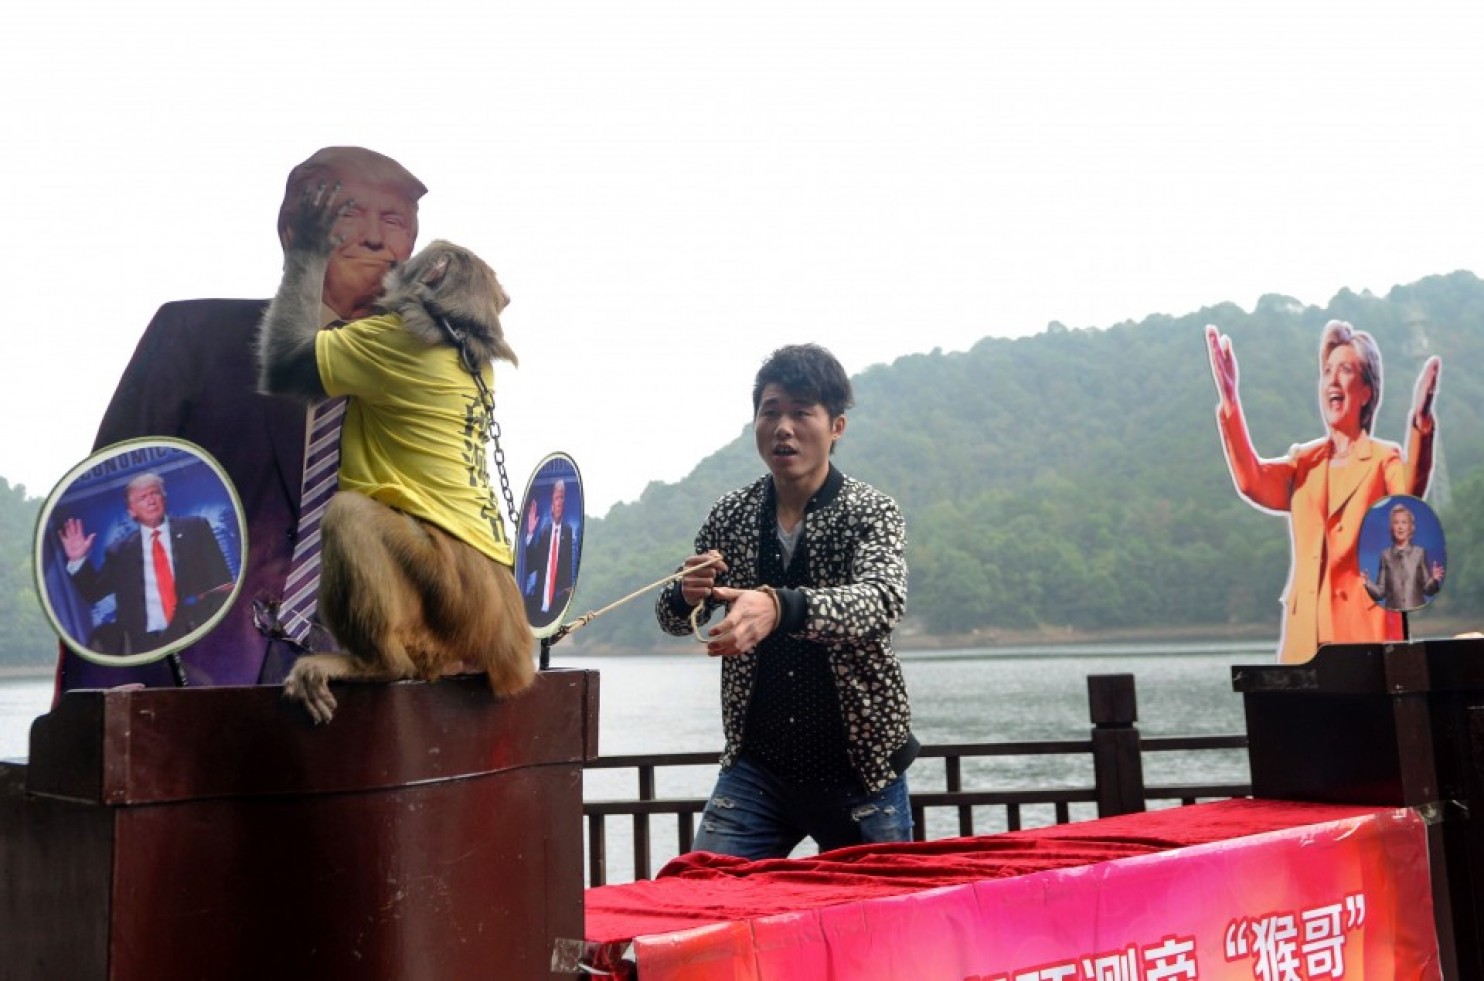 Mystical Chinese monkey predicts Trump will win the U.S. election